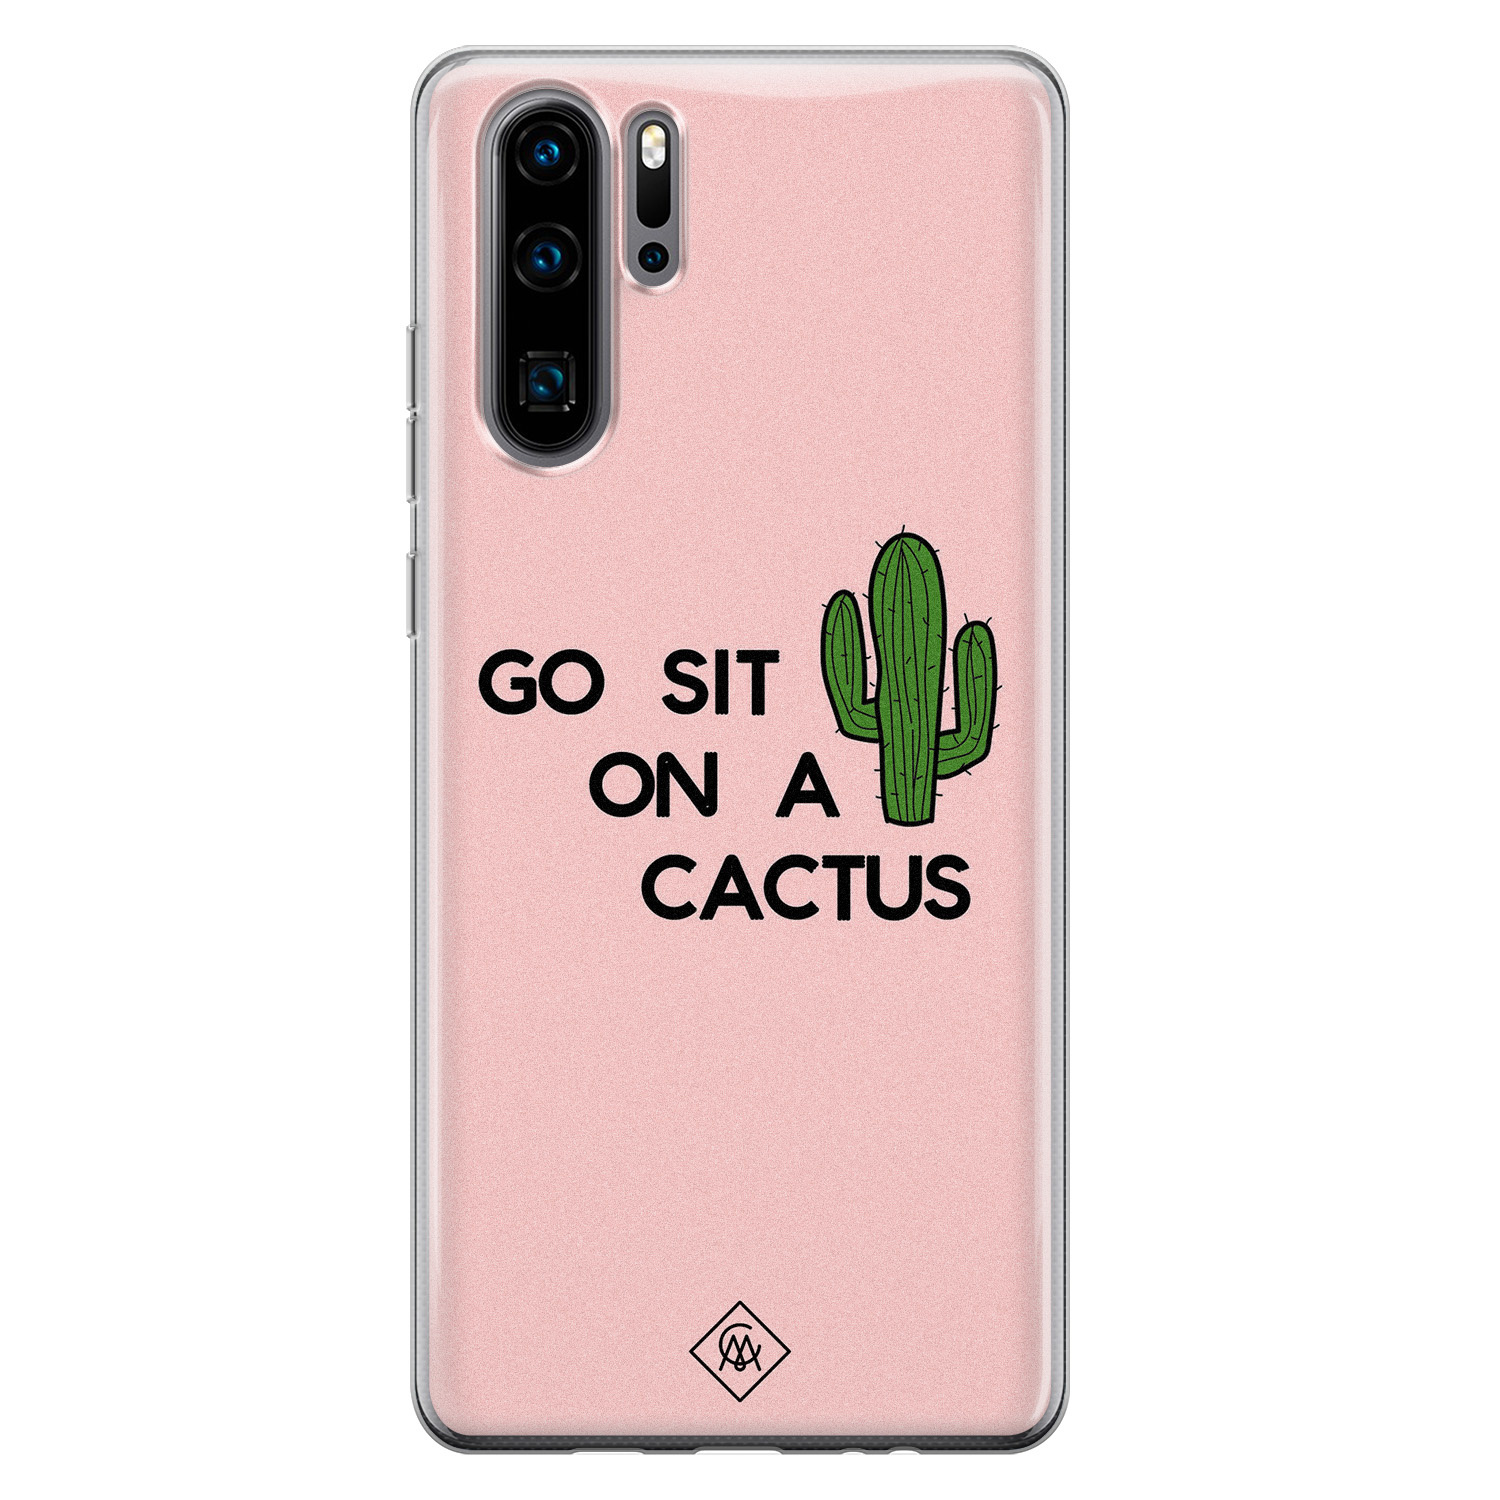 Huawei P30 Pro siliconen hoesje - Go sit on a cactus